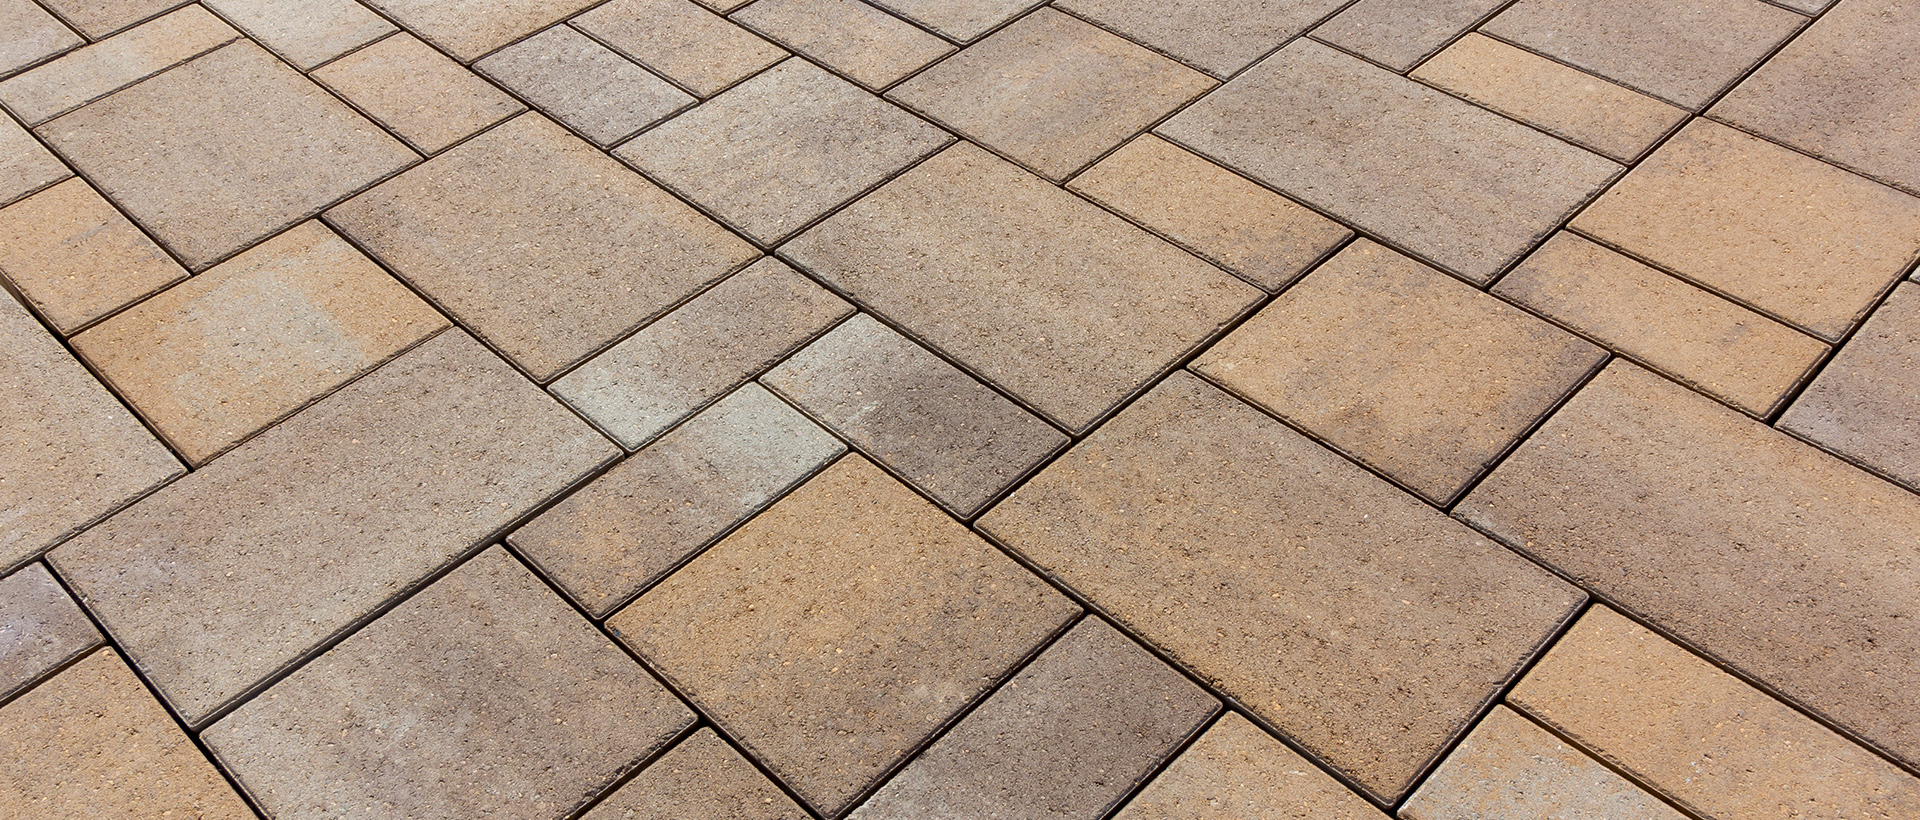 Reno is a three-piece, one-pallet paver system suitable for pedestrian and vehicular applications. Popular for its price point, its aesthetic appeal and ease of installation, Reno installs quickly in a random (no pattern) or simple fixed pattern. Tahoe 6cm Paver is the same system as Reno, but with a slate/embossed surface.